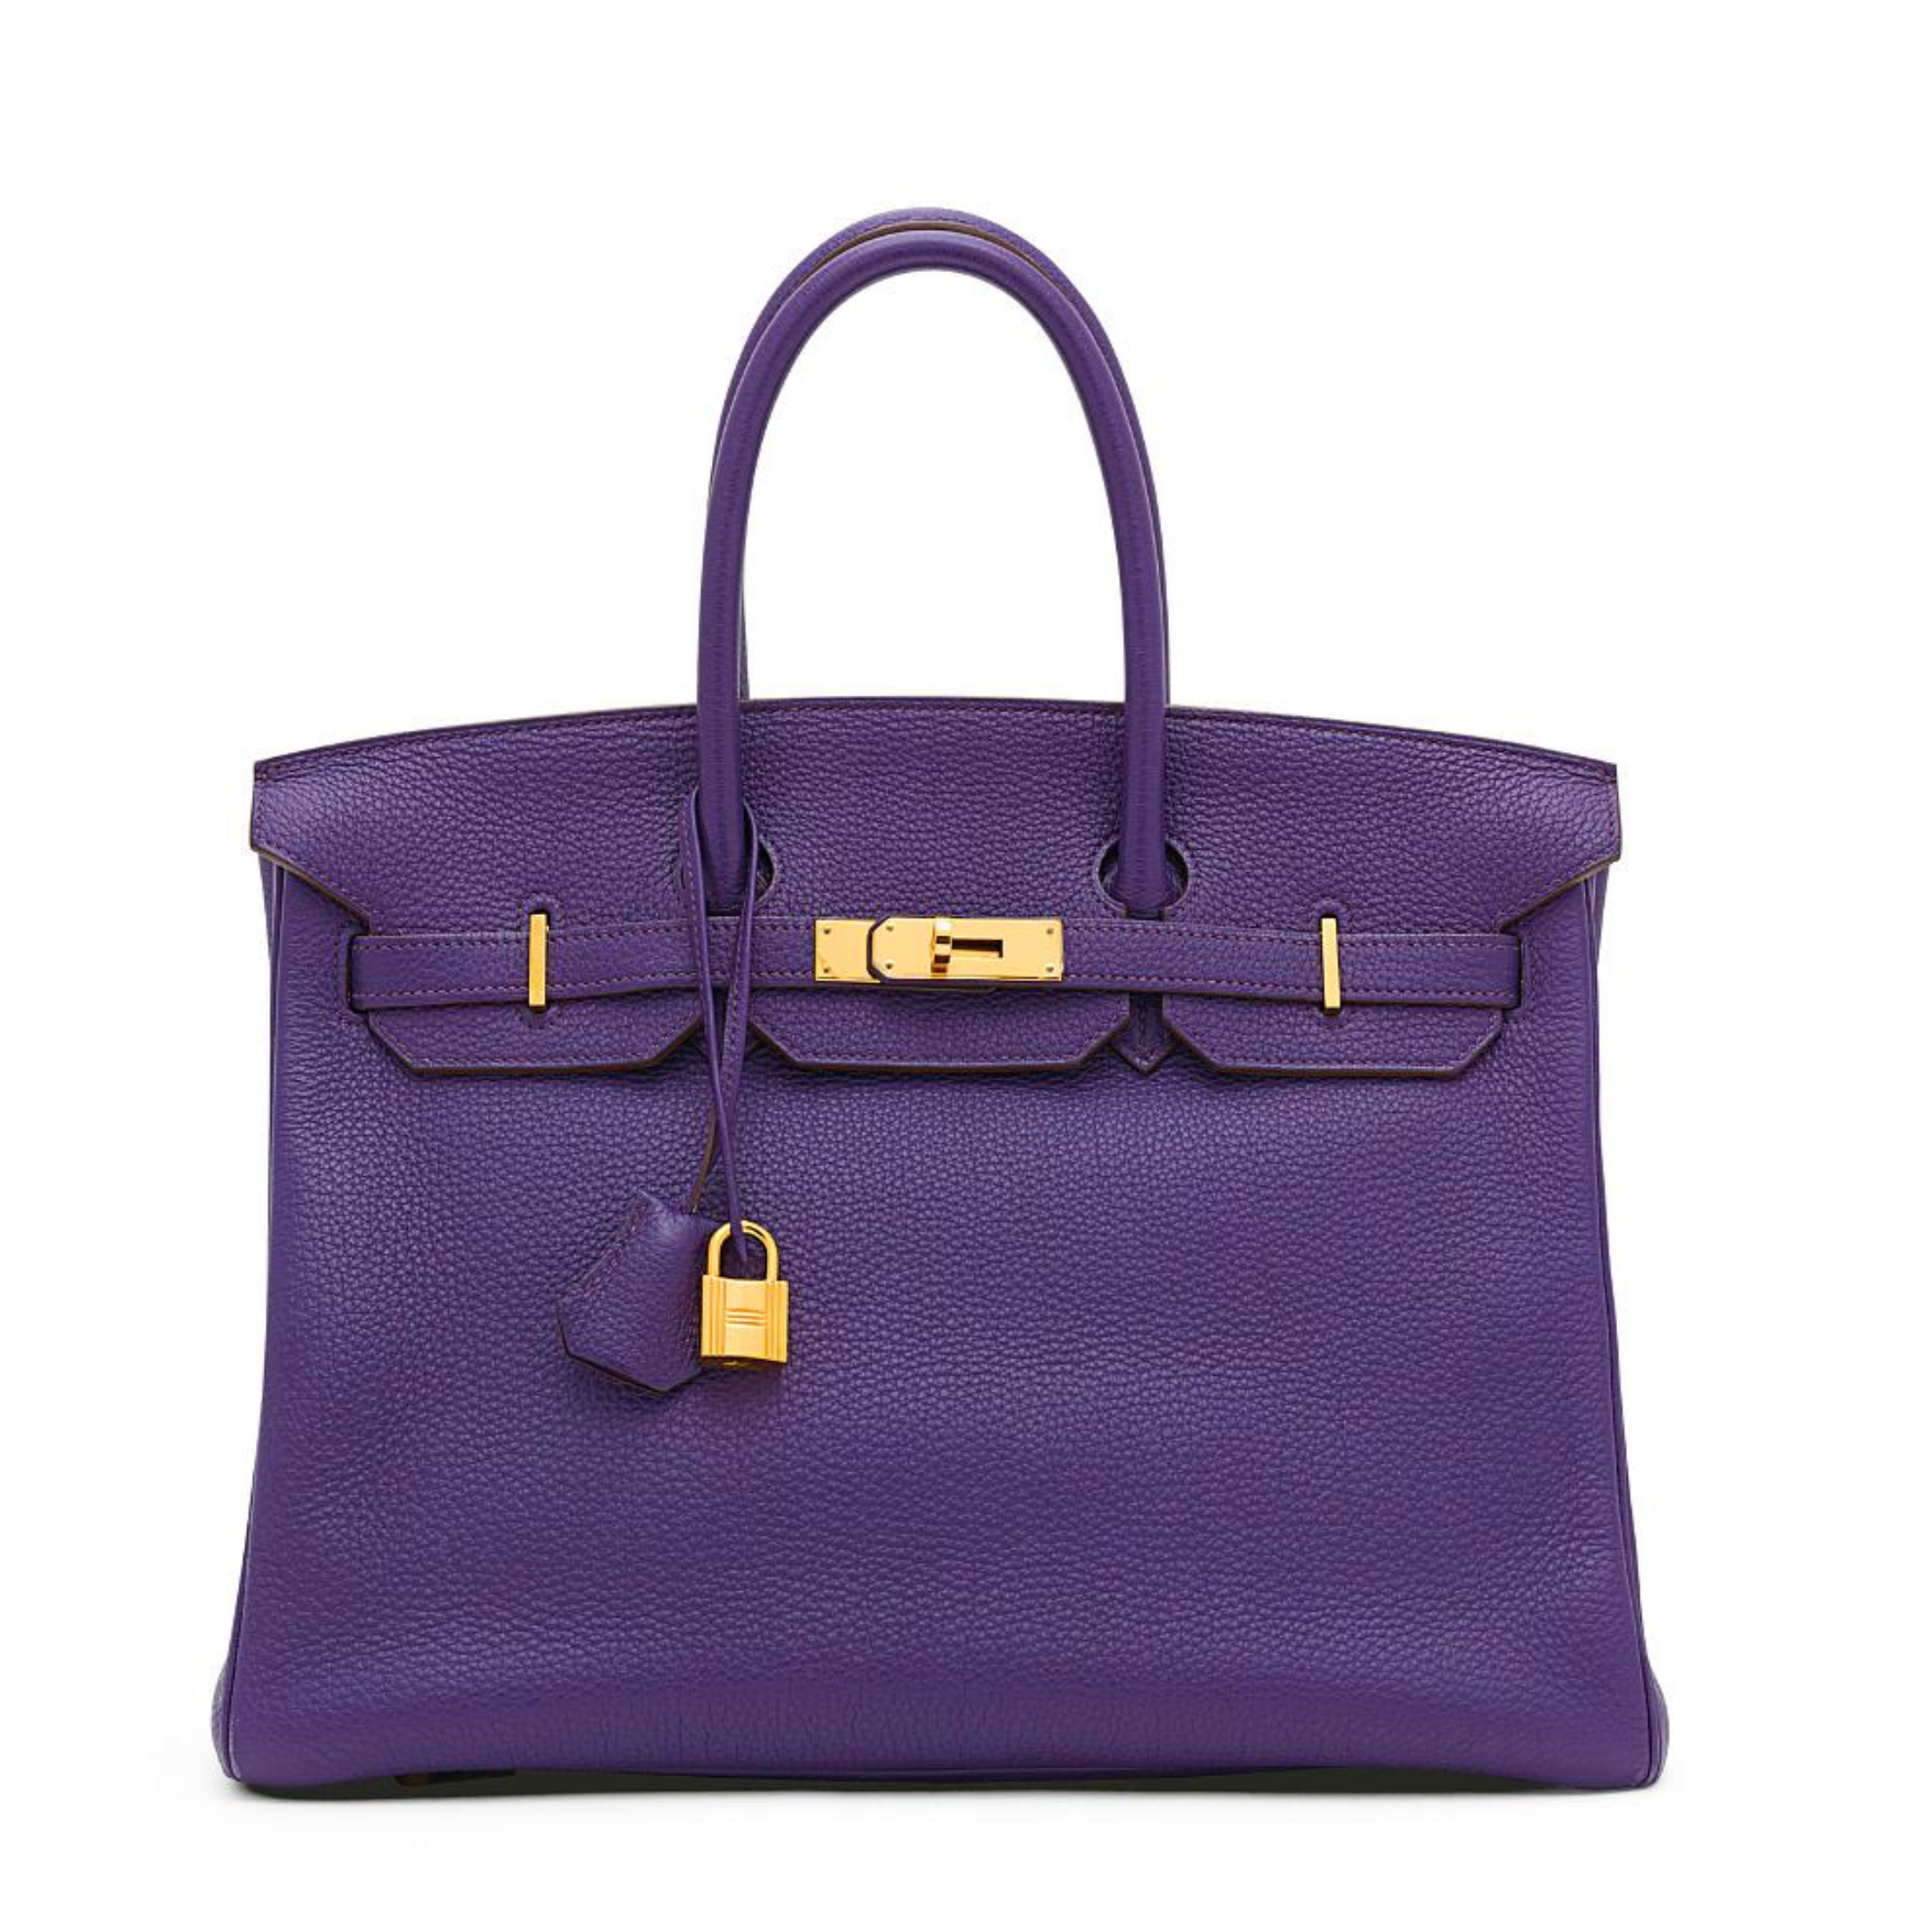 Kelly 35 bag in purple leather